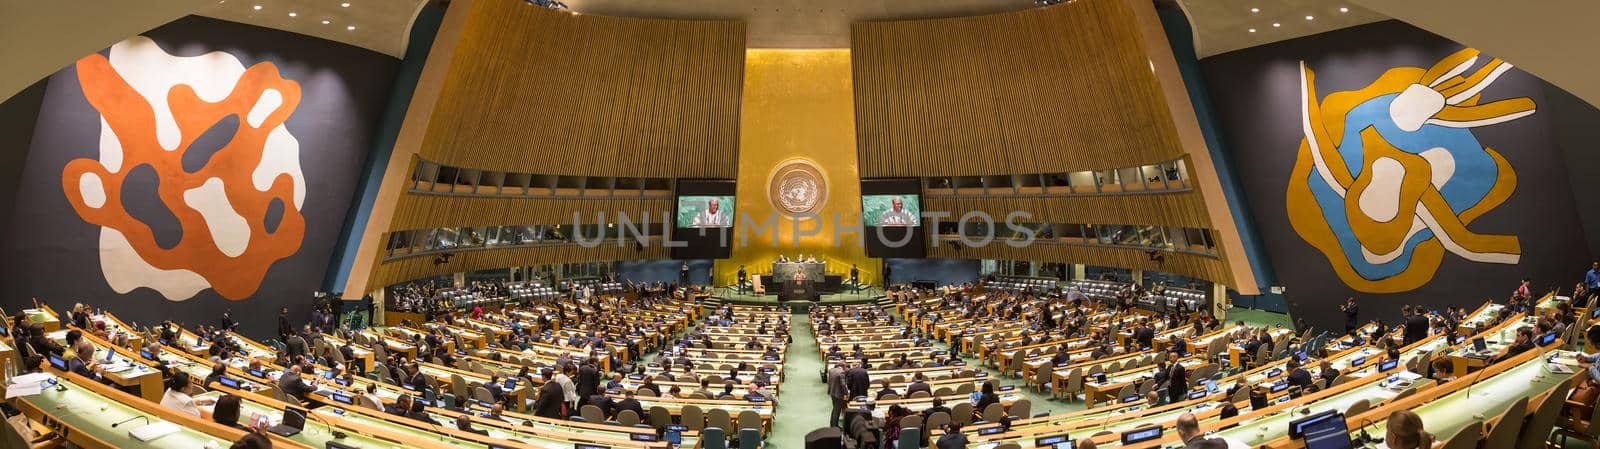 NEW YORK, USA - Sep 21, 2016: General view of the conference room of 71st session of the United Nations General Assembly in New York